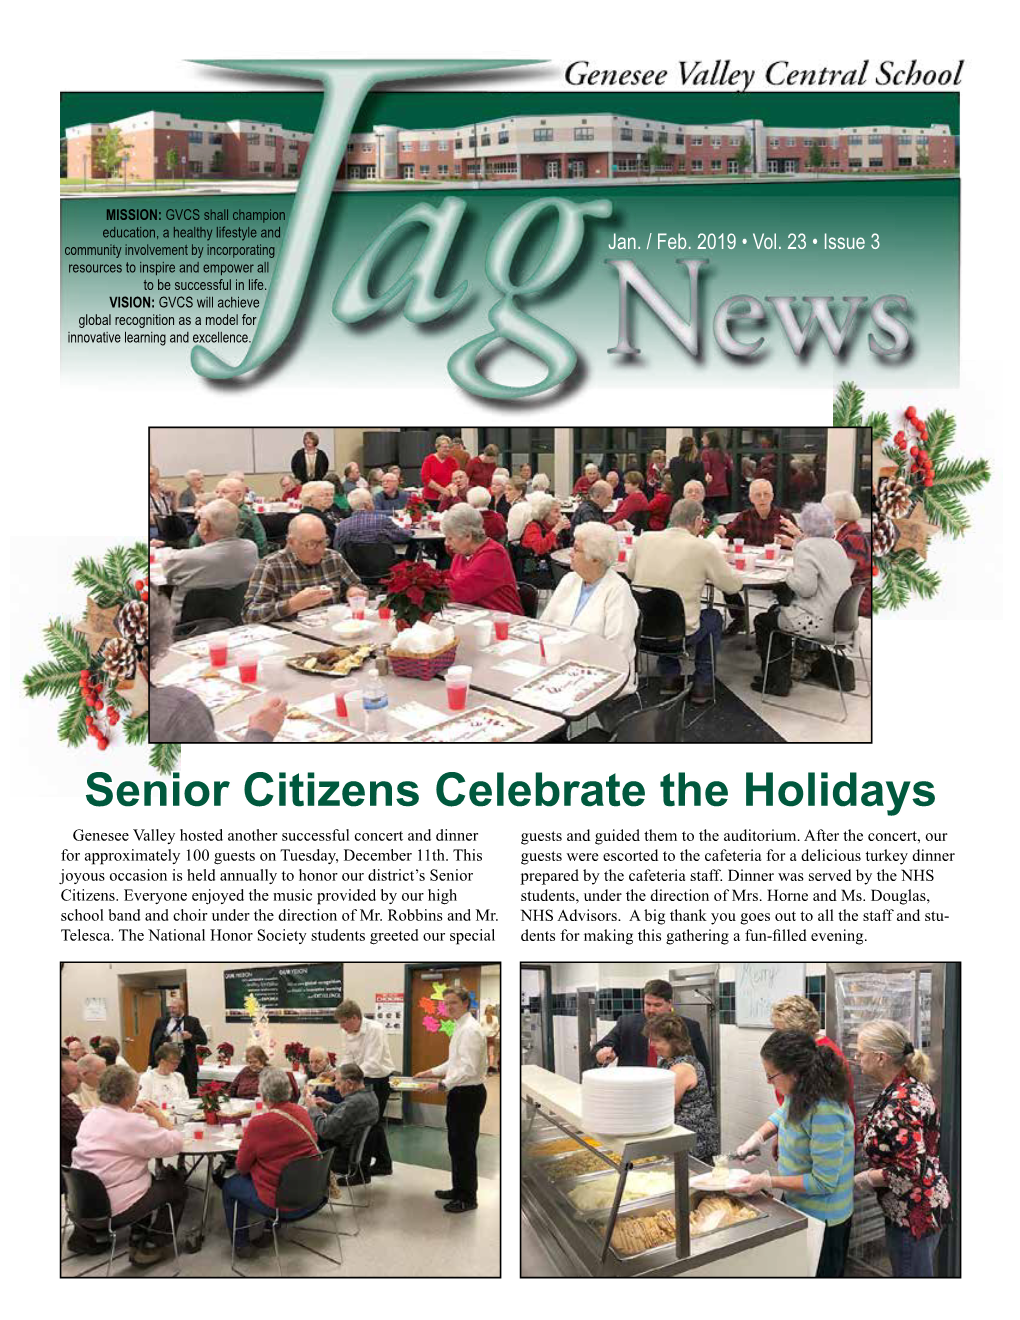 Senior Citizens Celebrate the Holidays Genesee Valley Hosted Another Successful Concert and Dinner Guests and Guided Them to the Auditorium